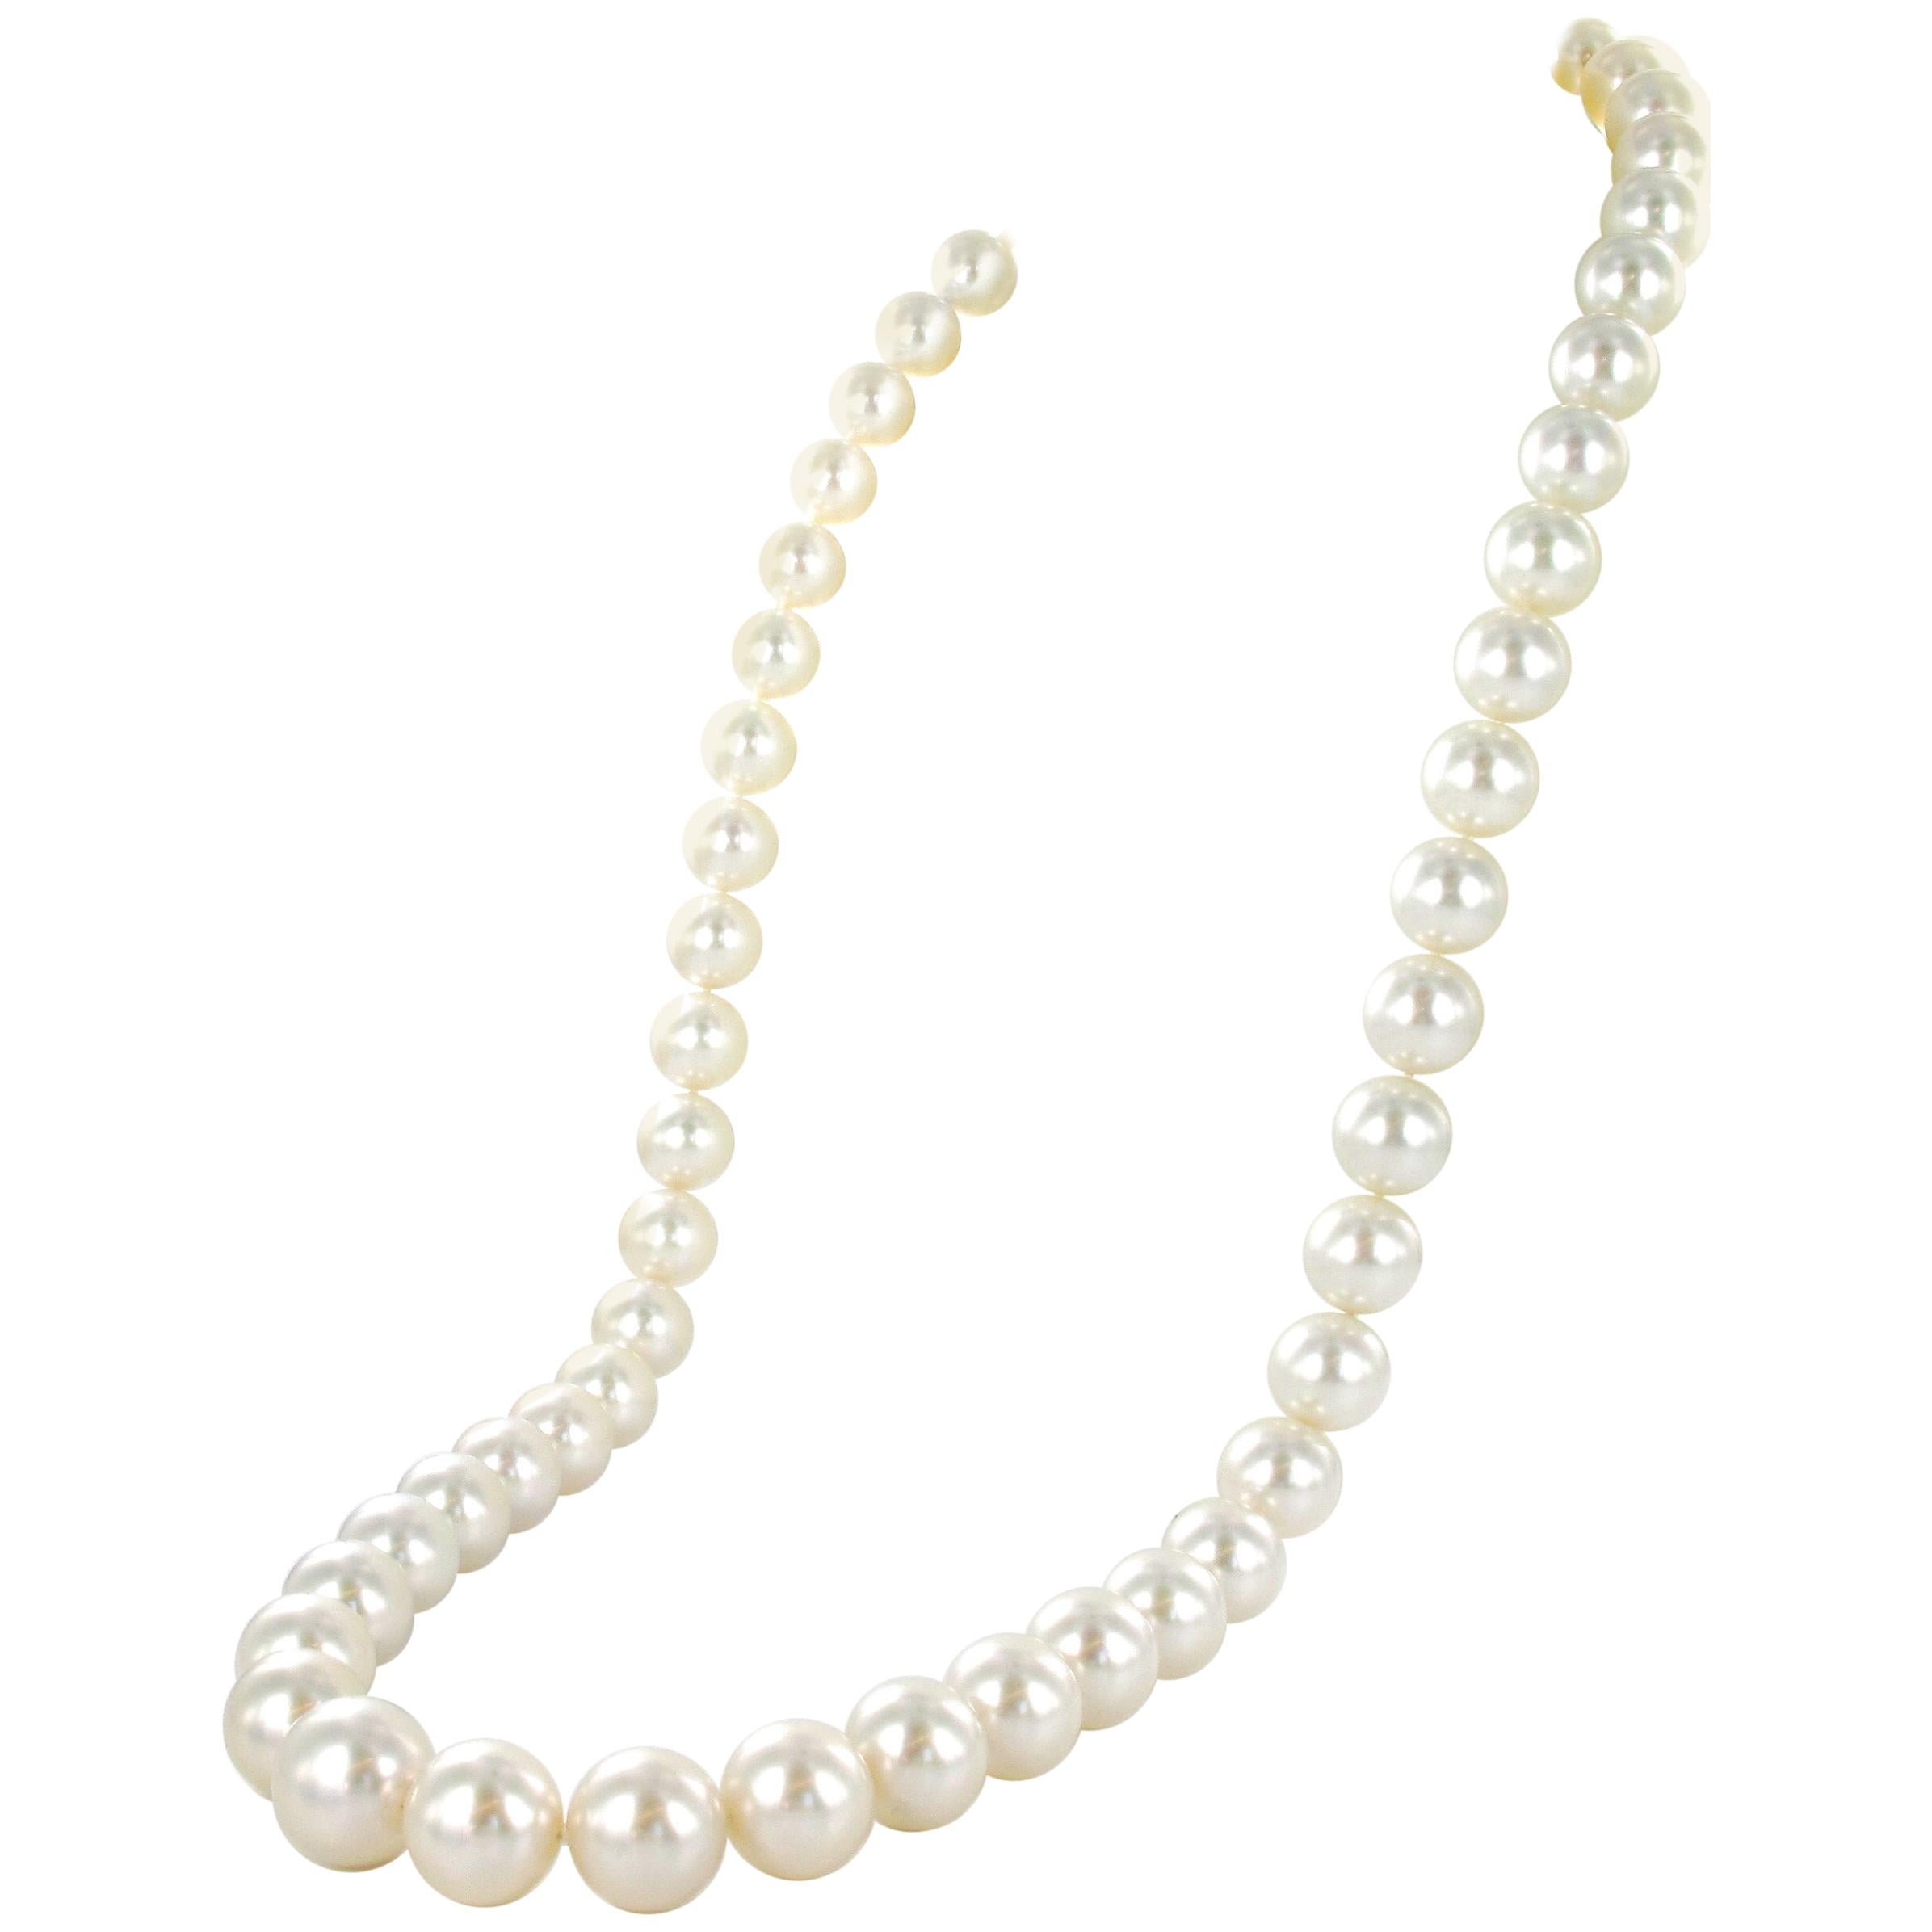 Magnificent White South Sea Cultured Pearl Necklace in Opera Length